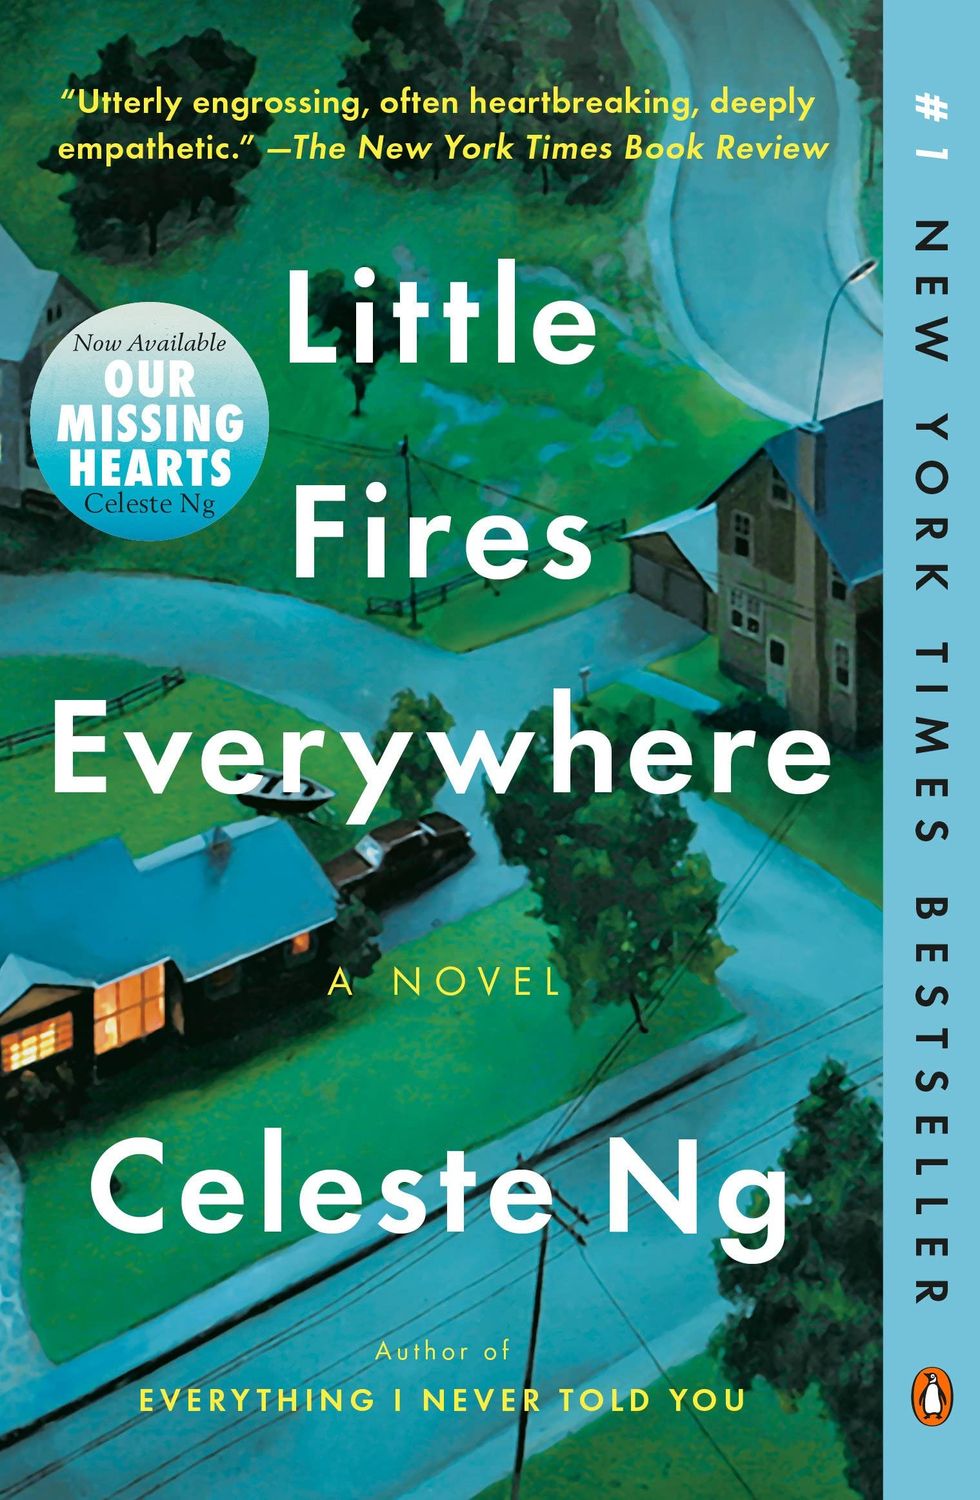 "Little Fires Everywhere" by Celeste Ng